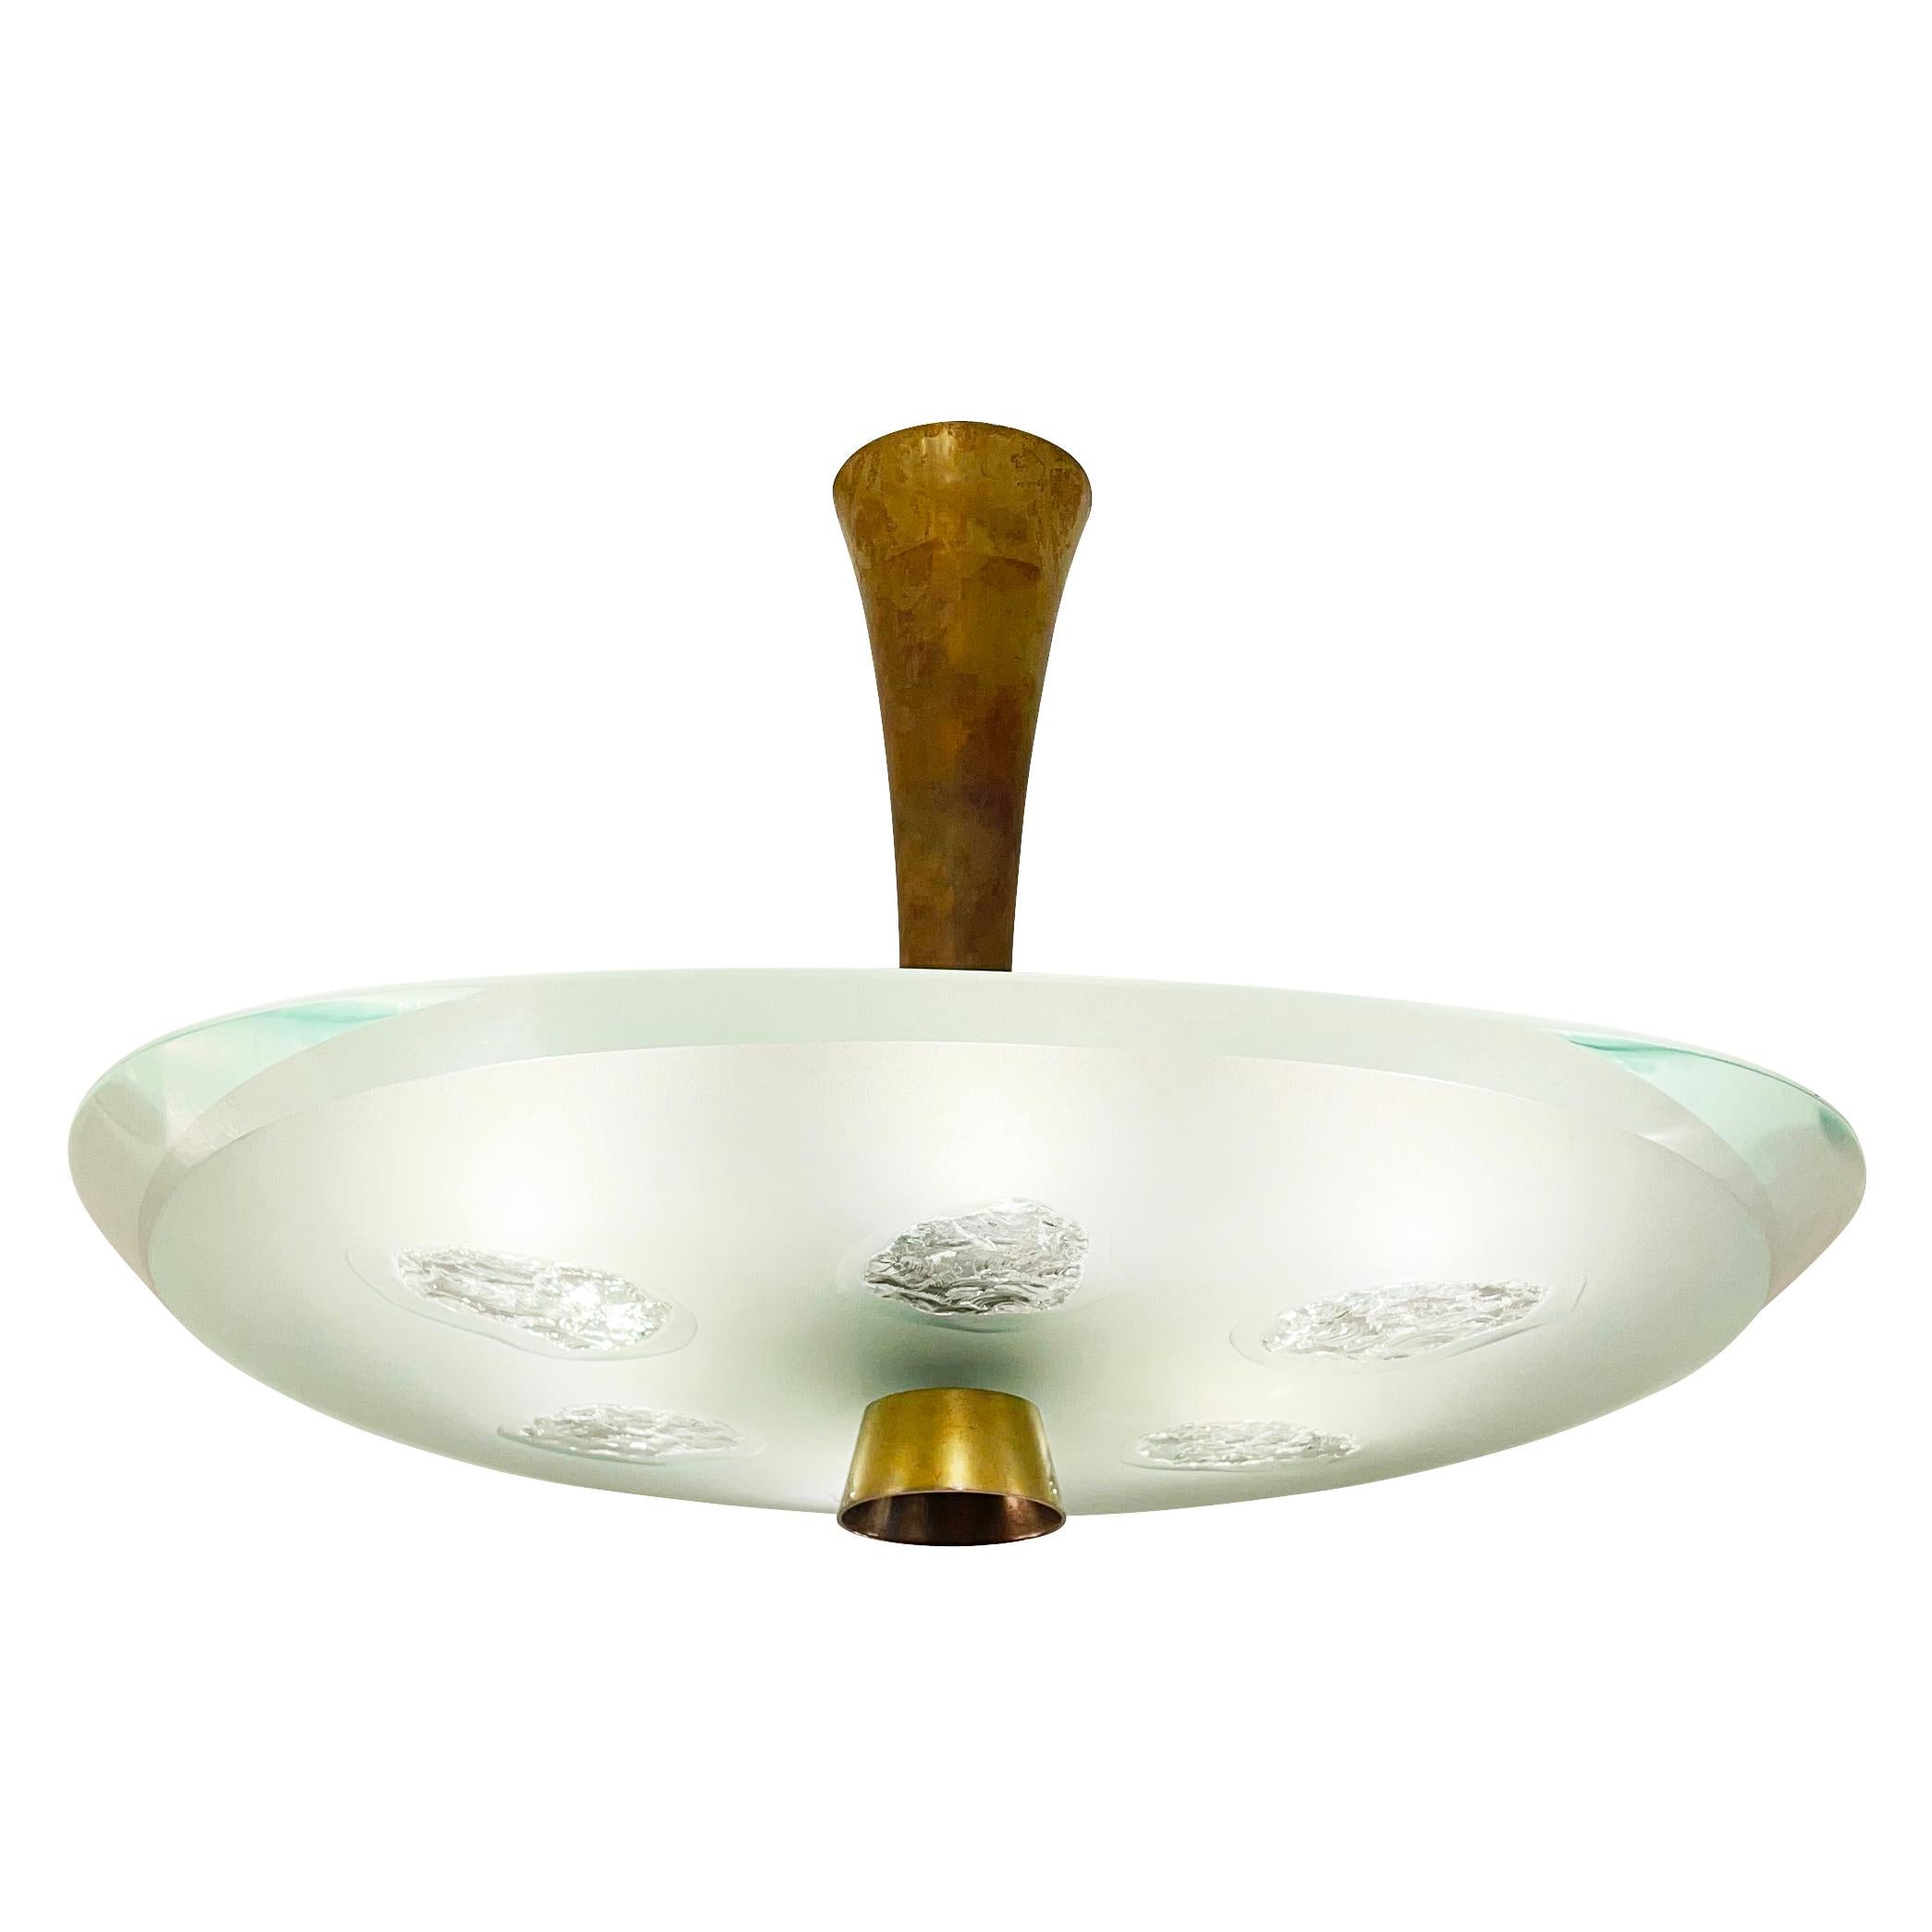 Fontana Arte ceiling light model 1748 designed by Max Ingrand in the 1950s. Features a beautiful thick glass shade with beveled edges which has been chiseled in six irregular areas. Holds six candelabra bulbs.

Condition: Excellent vintage